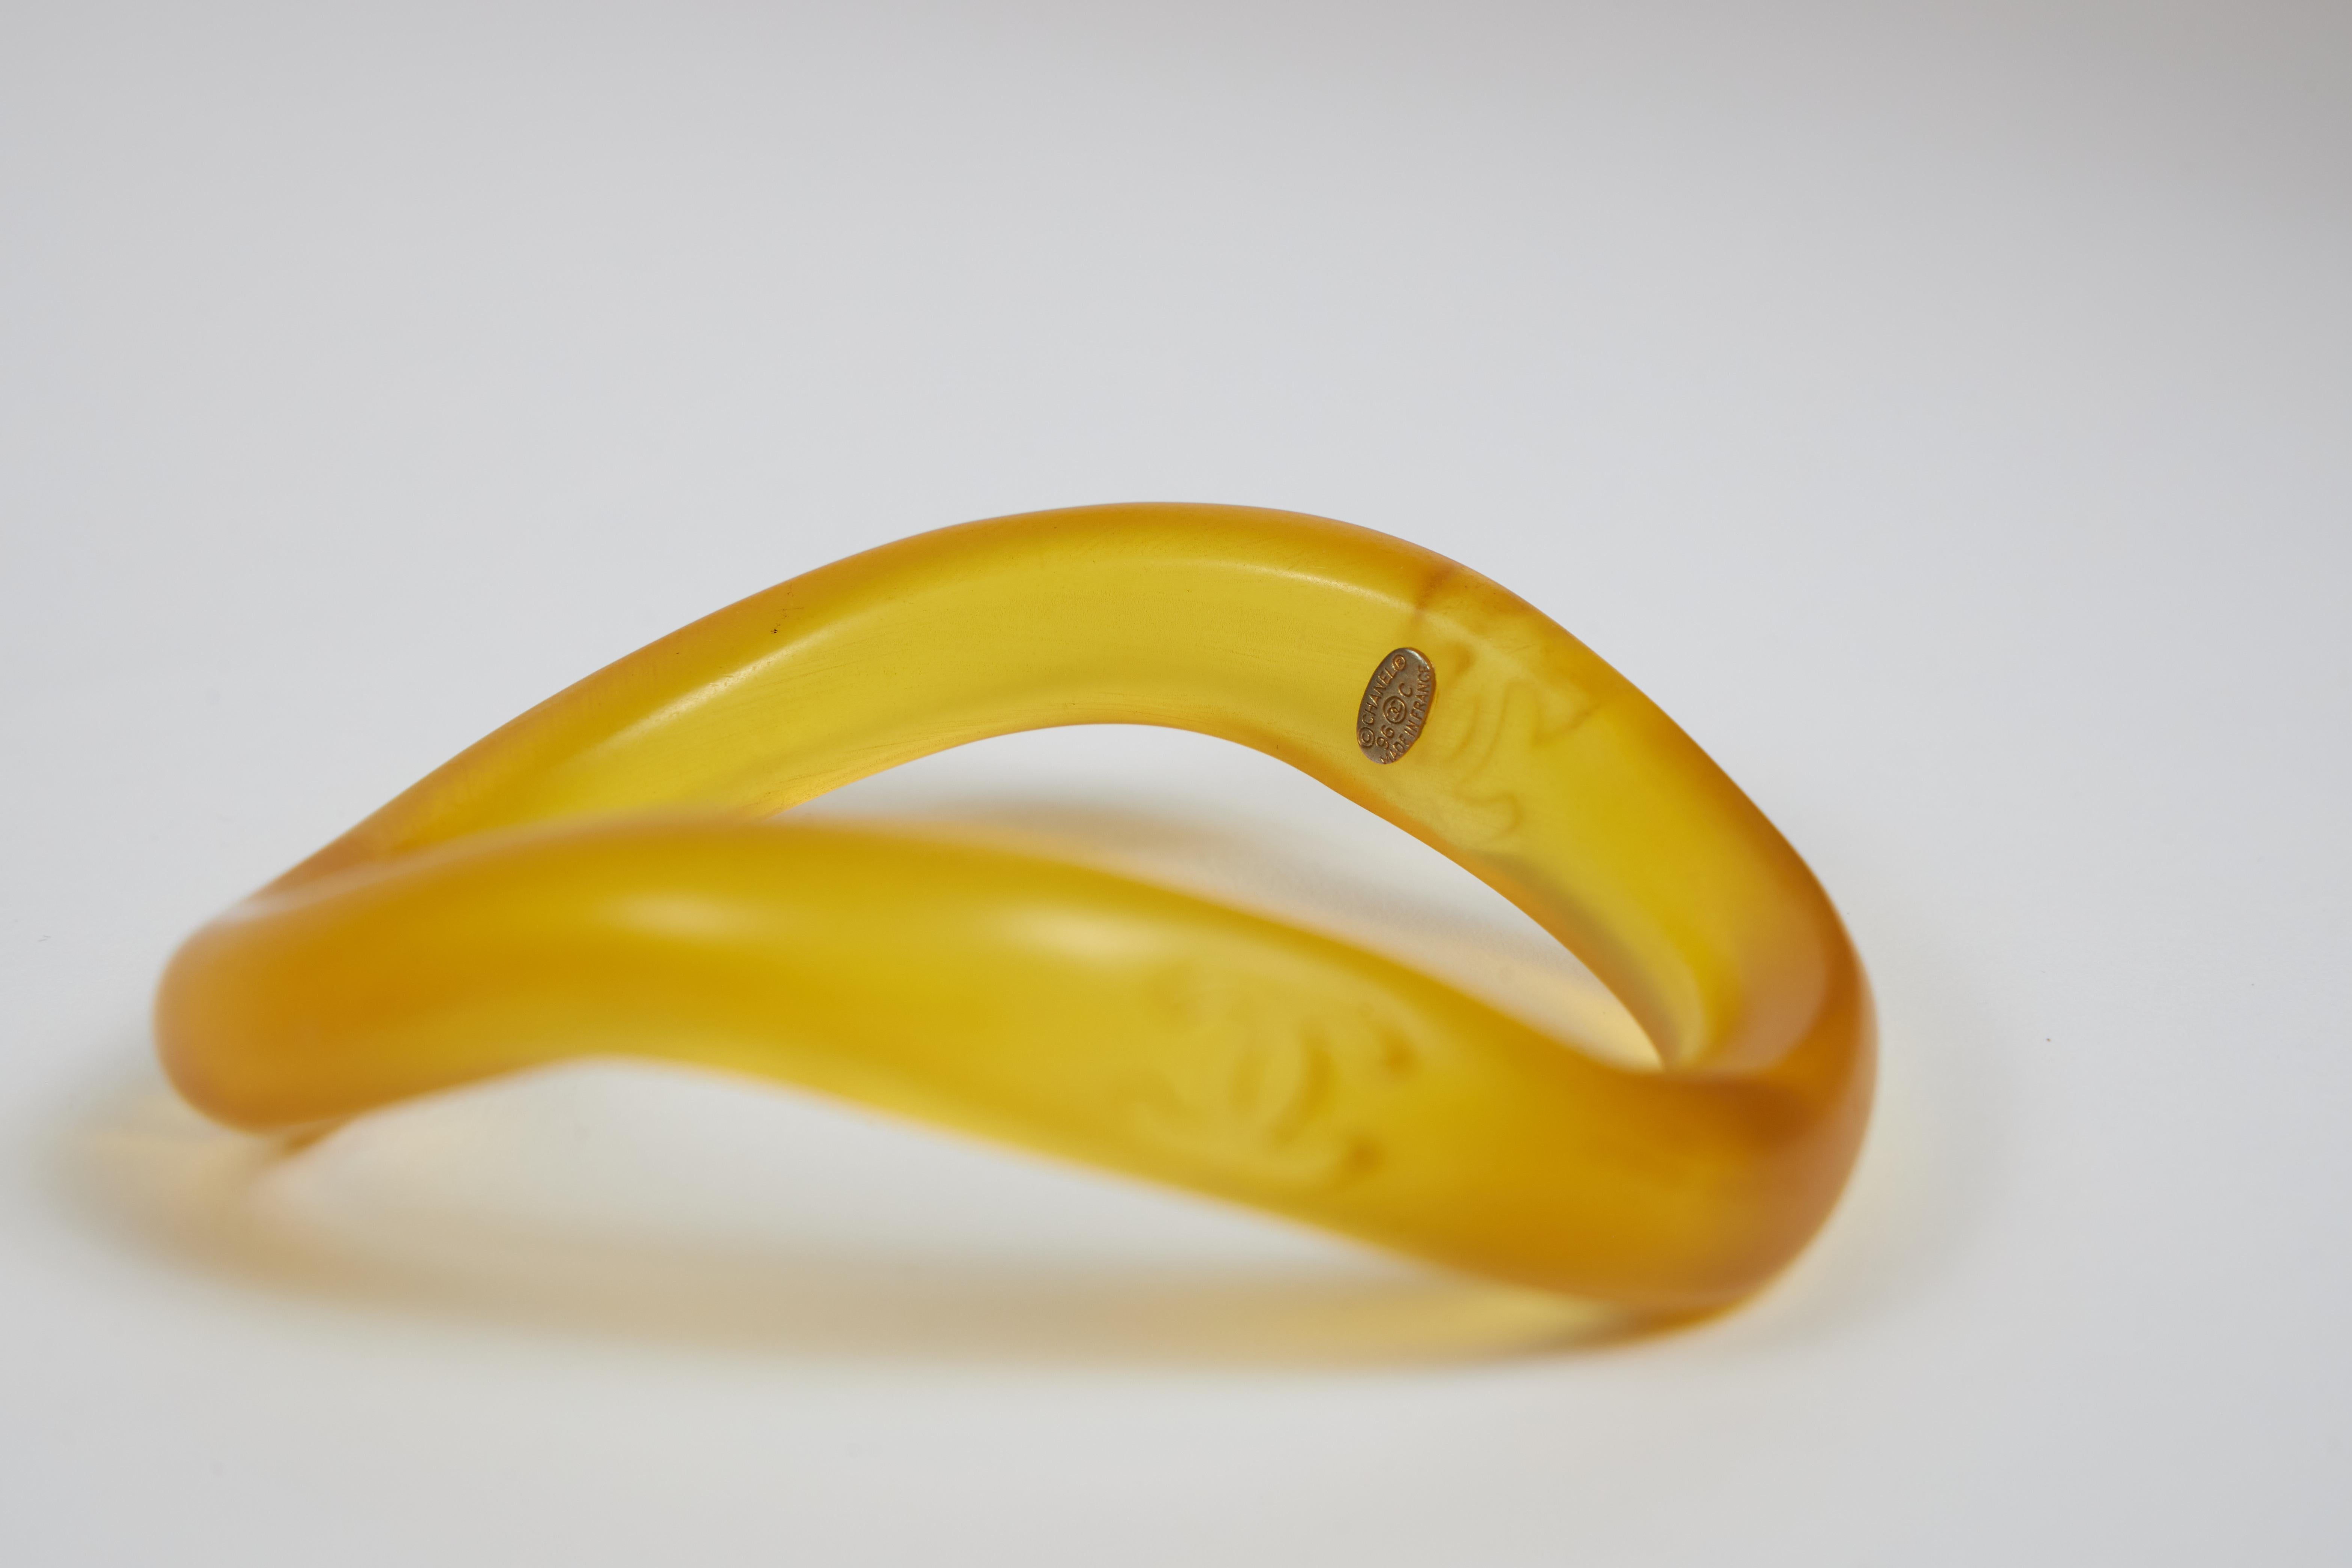 Chanel yellow resin irregular shape bangle bracelet. Cruise 96 collection. Comes with original pouch.